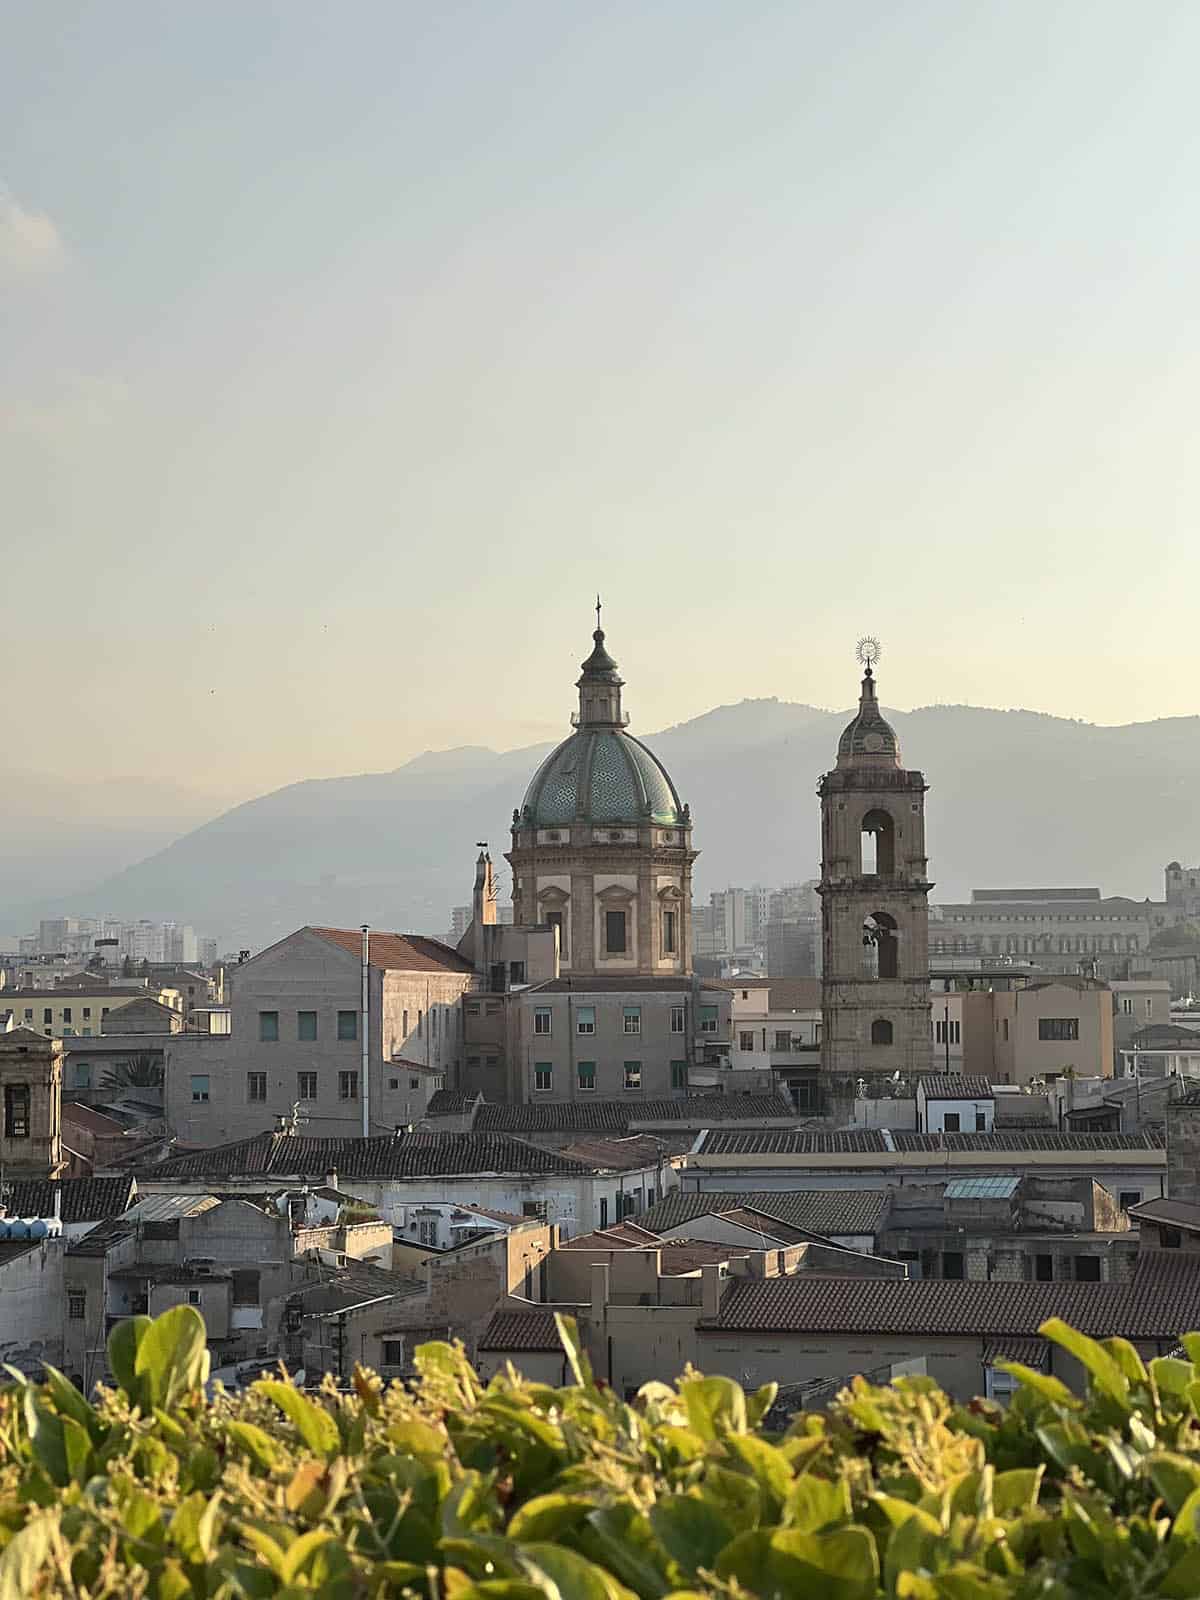 An image of the skyline of Palermo as viewed from a rooftop bar